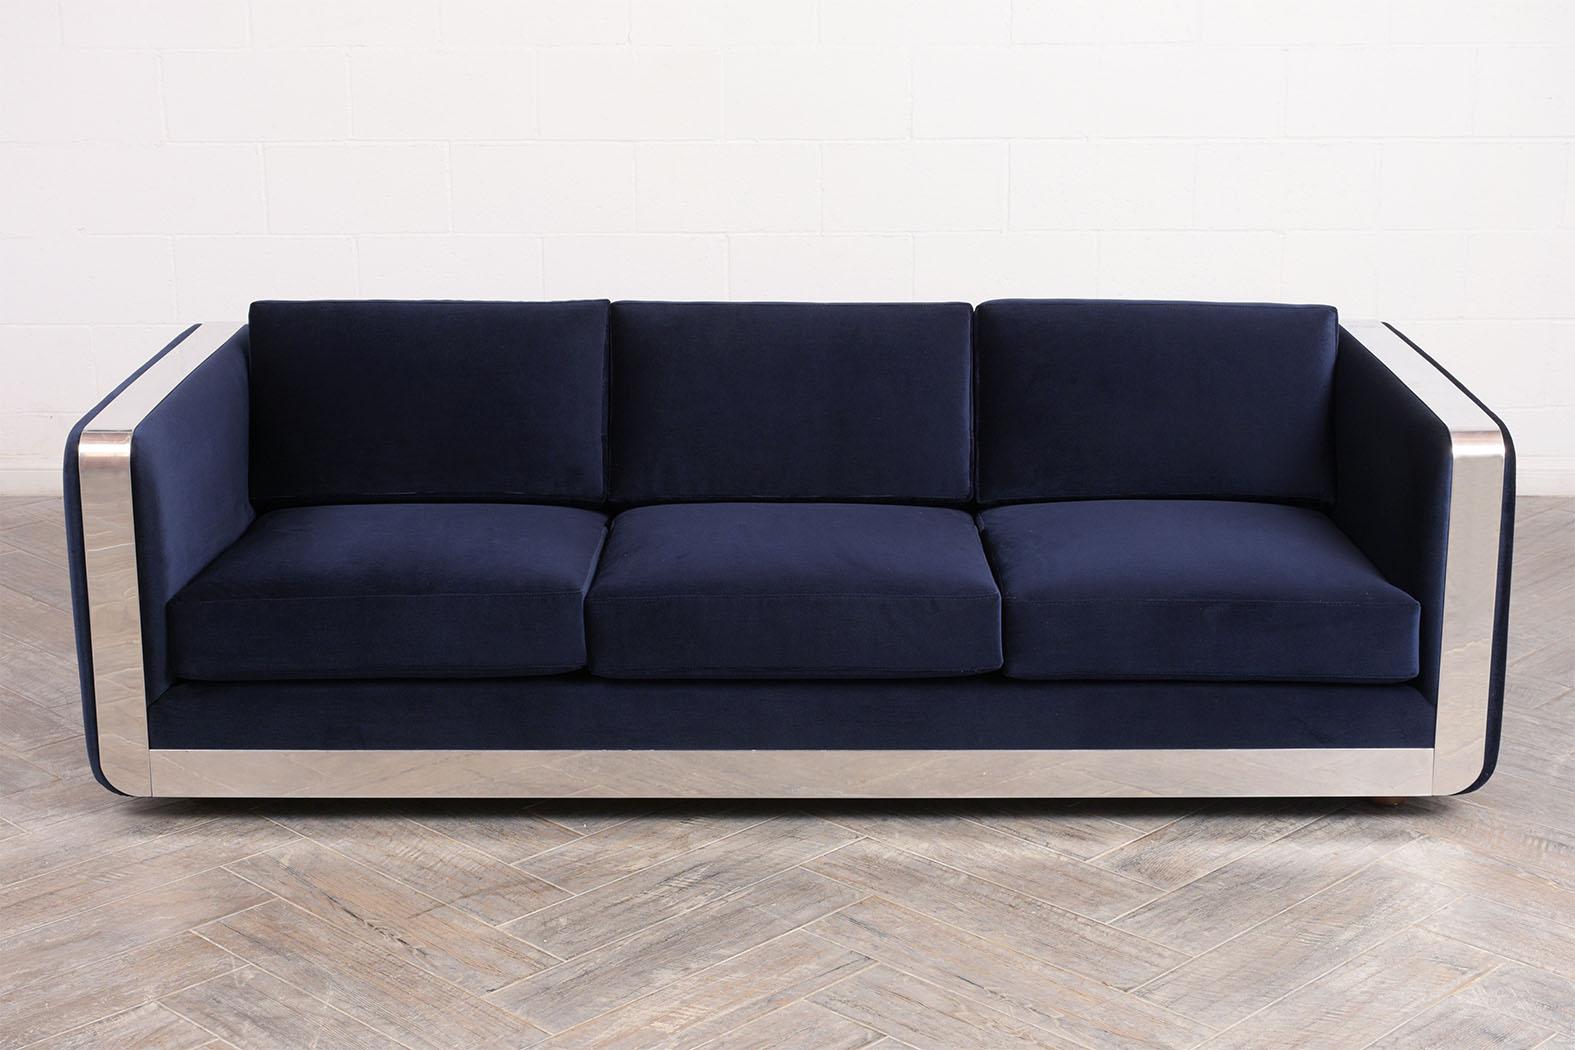 This 1960s stylish modern velvet sofa with chrome molding is in good condition. The sofa has been completely reupholstered comes with three comfortable seat cushions and three back pillows upholstered in a navy blue velvet fabric and with topstitch